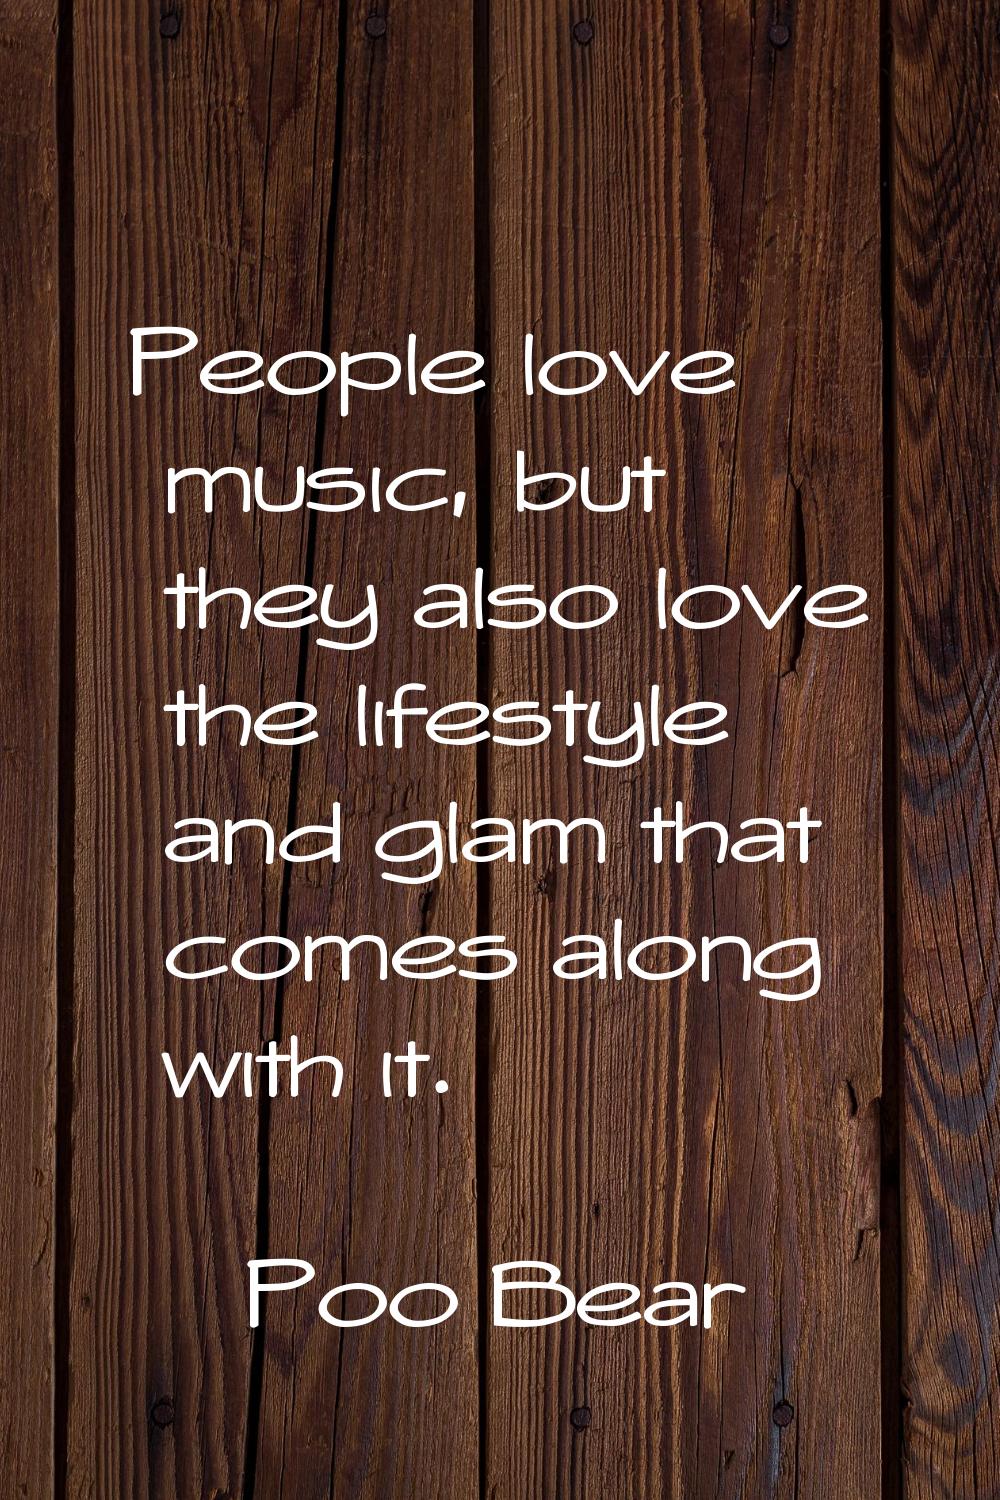 People love music, but they also love the lifestyle and glam that comes along with it.